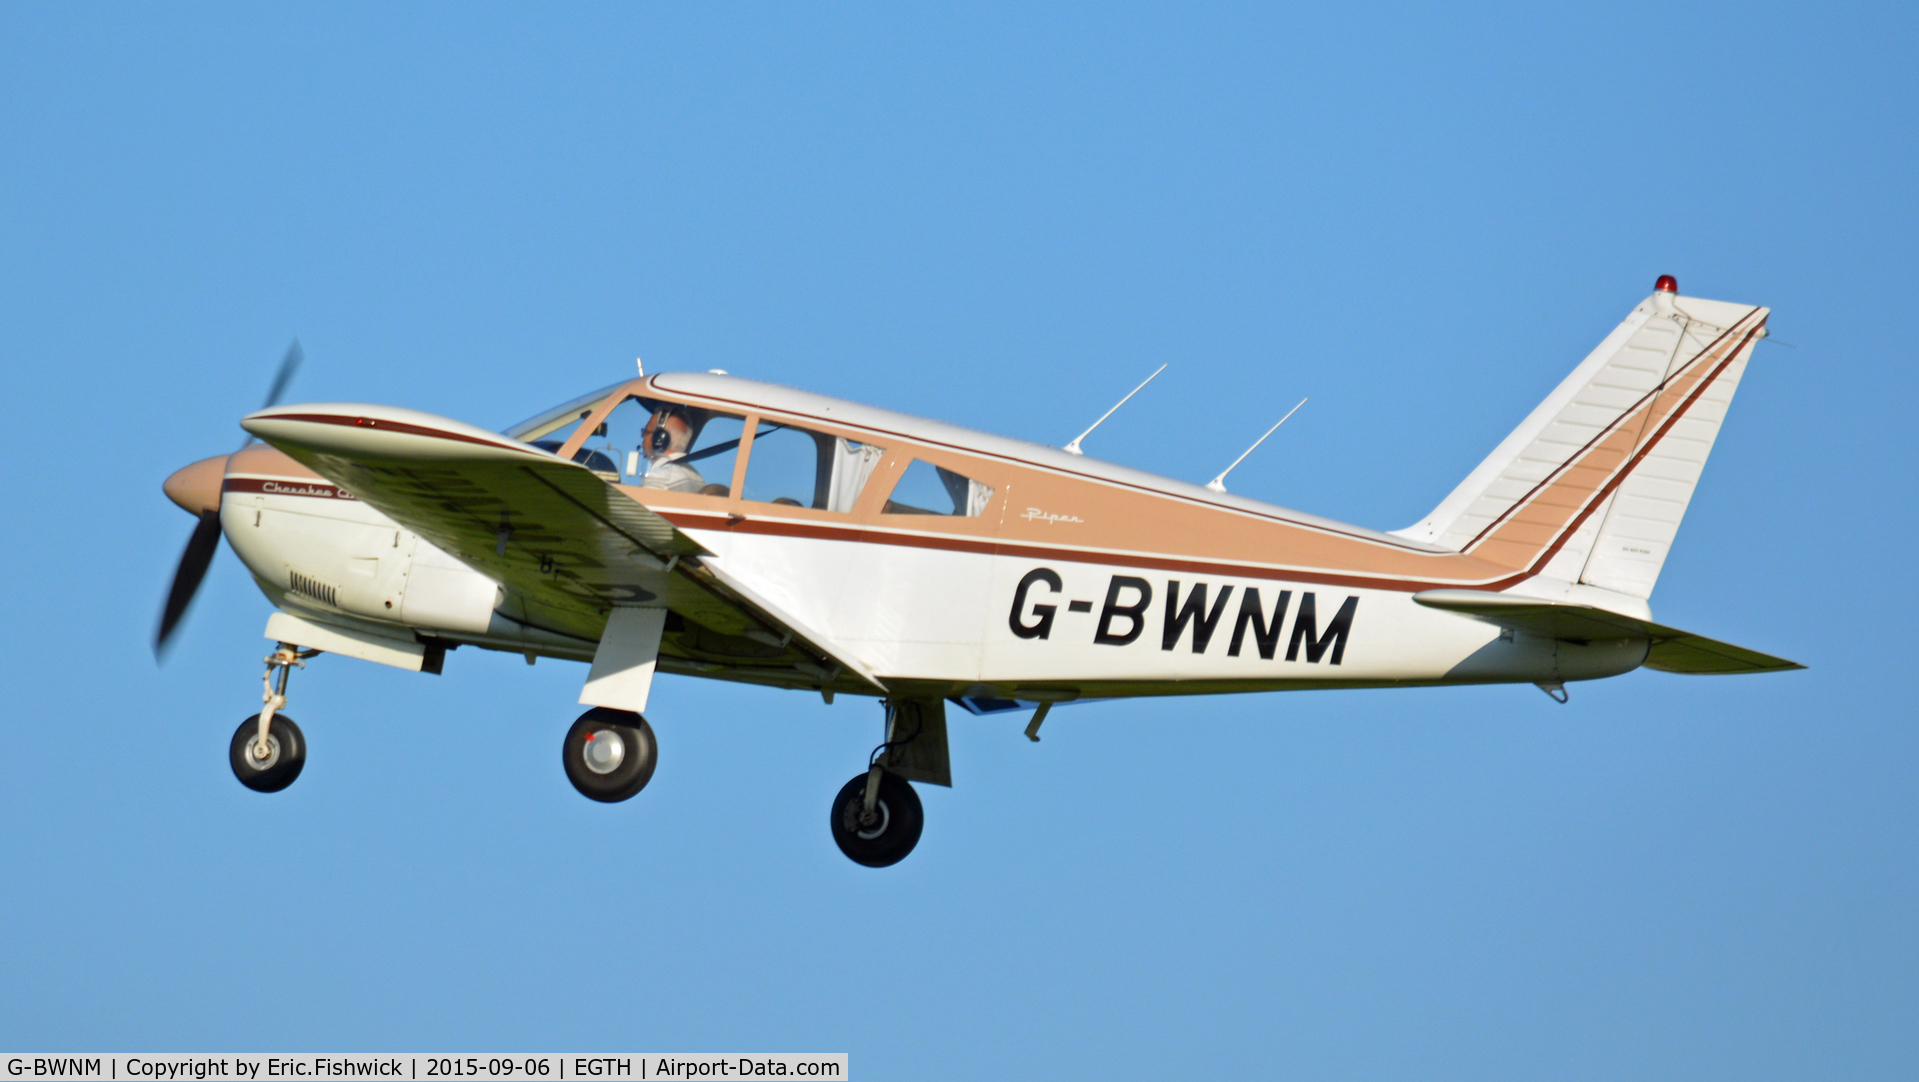 G-BWNM, 1968 Piper PA-28R-180 Cherokee Arrow C/N 28R-30435, 41. G-BWNM departing The Shuttleworth Pagent Airshow, Sept. 2015.